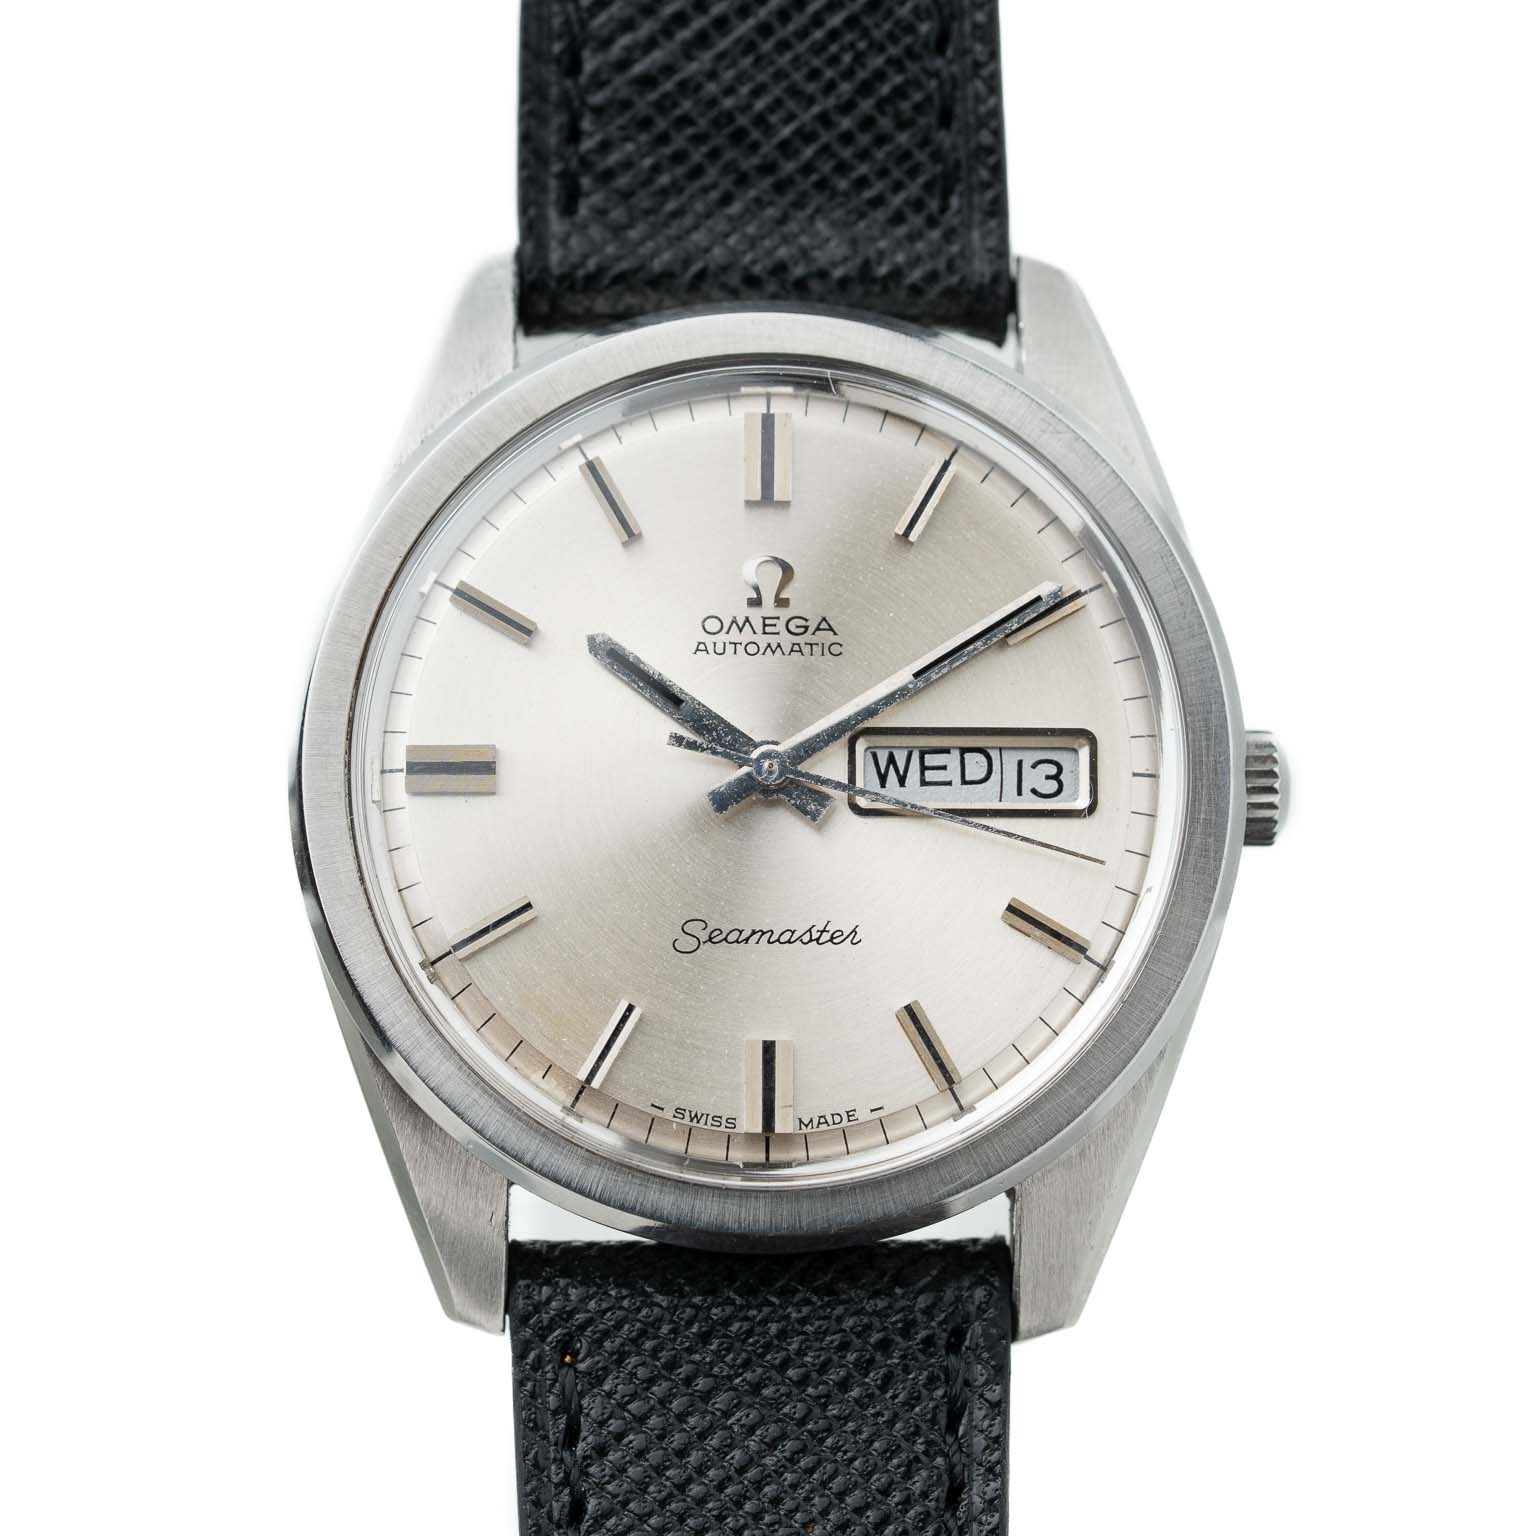 Vintage Omega Seamaster day date with white dial 168.023 from 1967 watch front